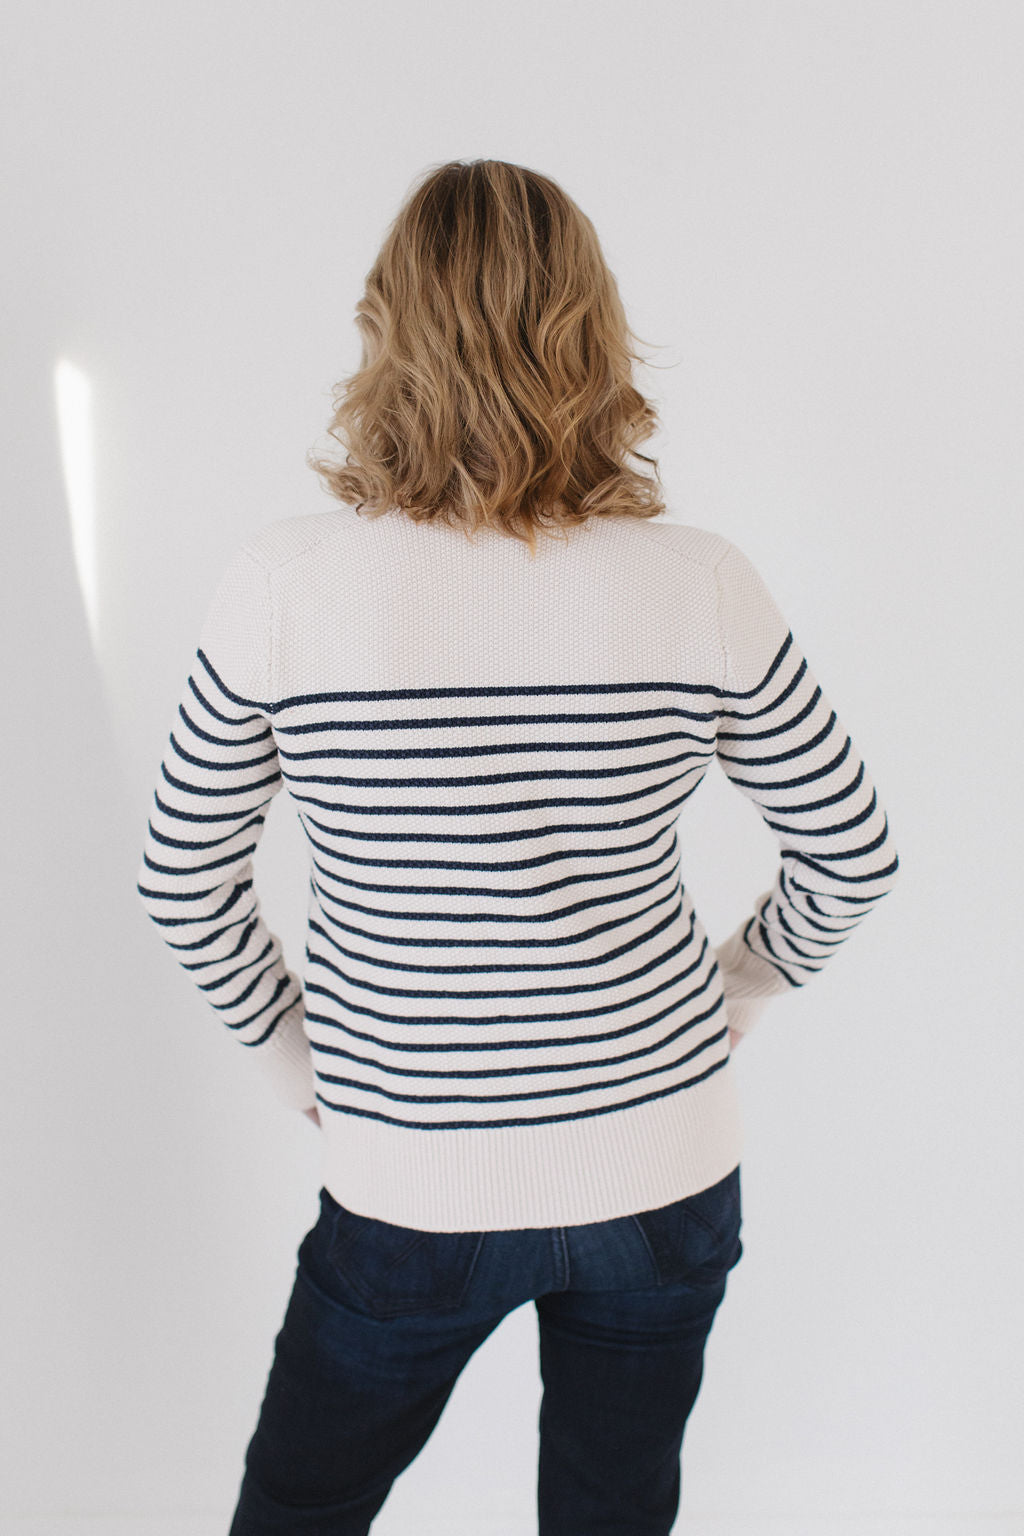 The Perfect Striped Cardigan